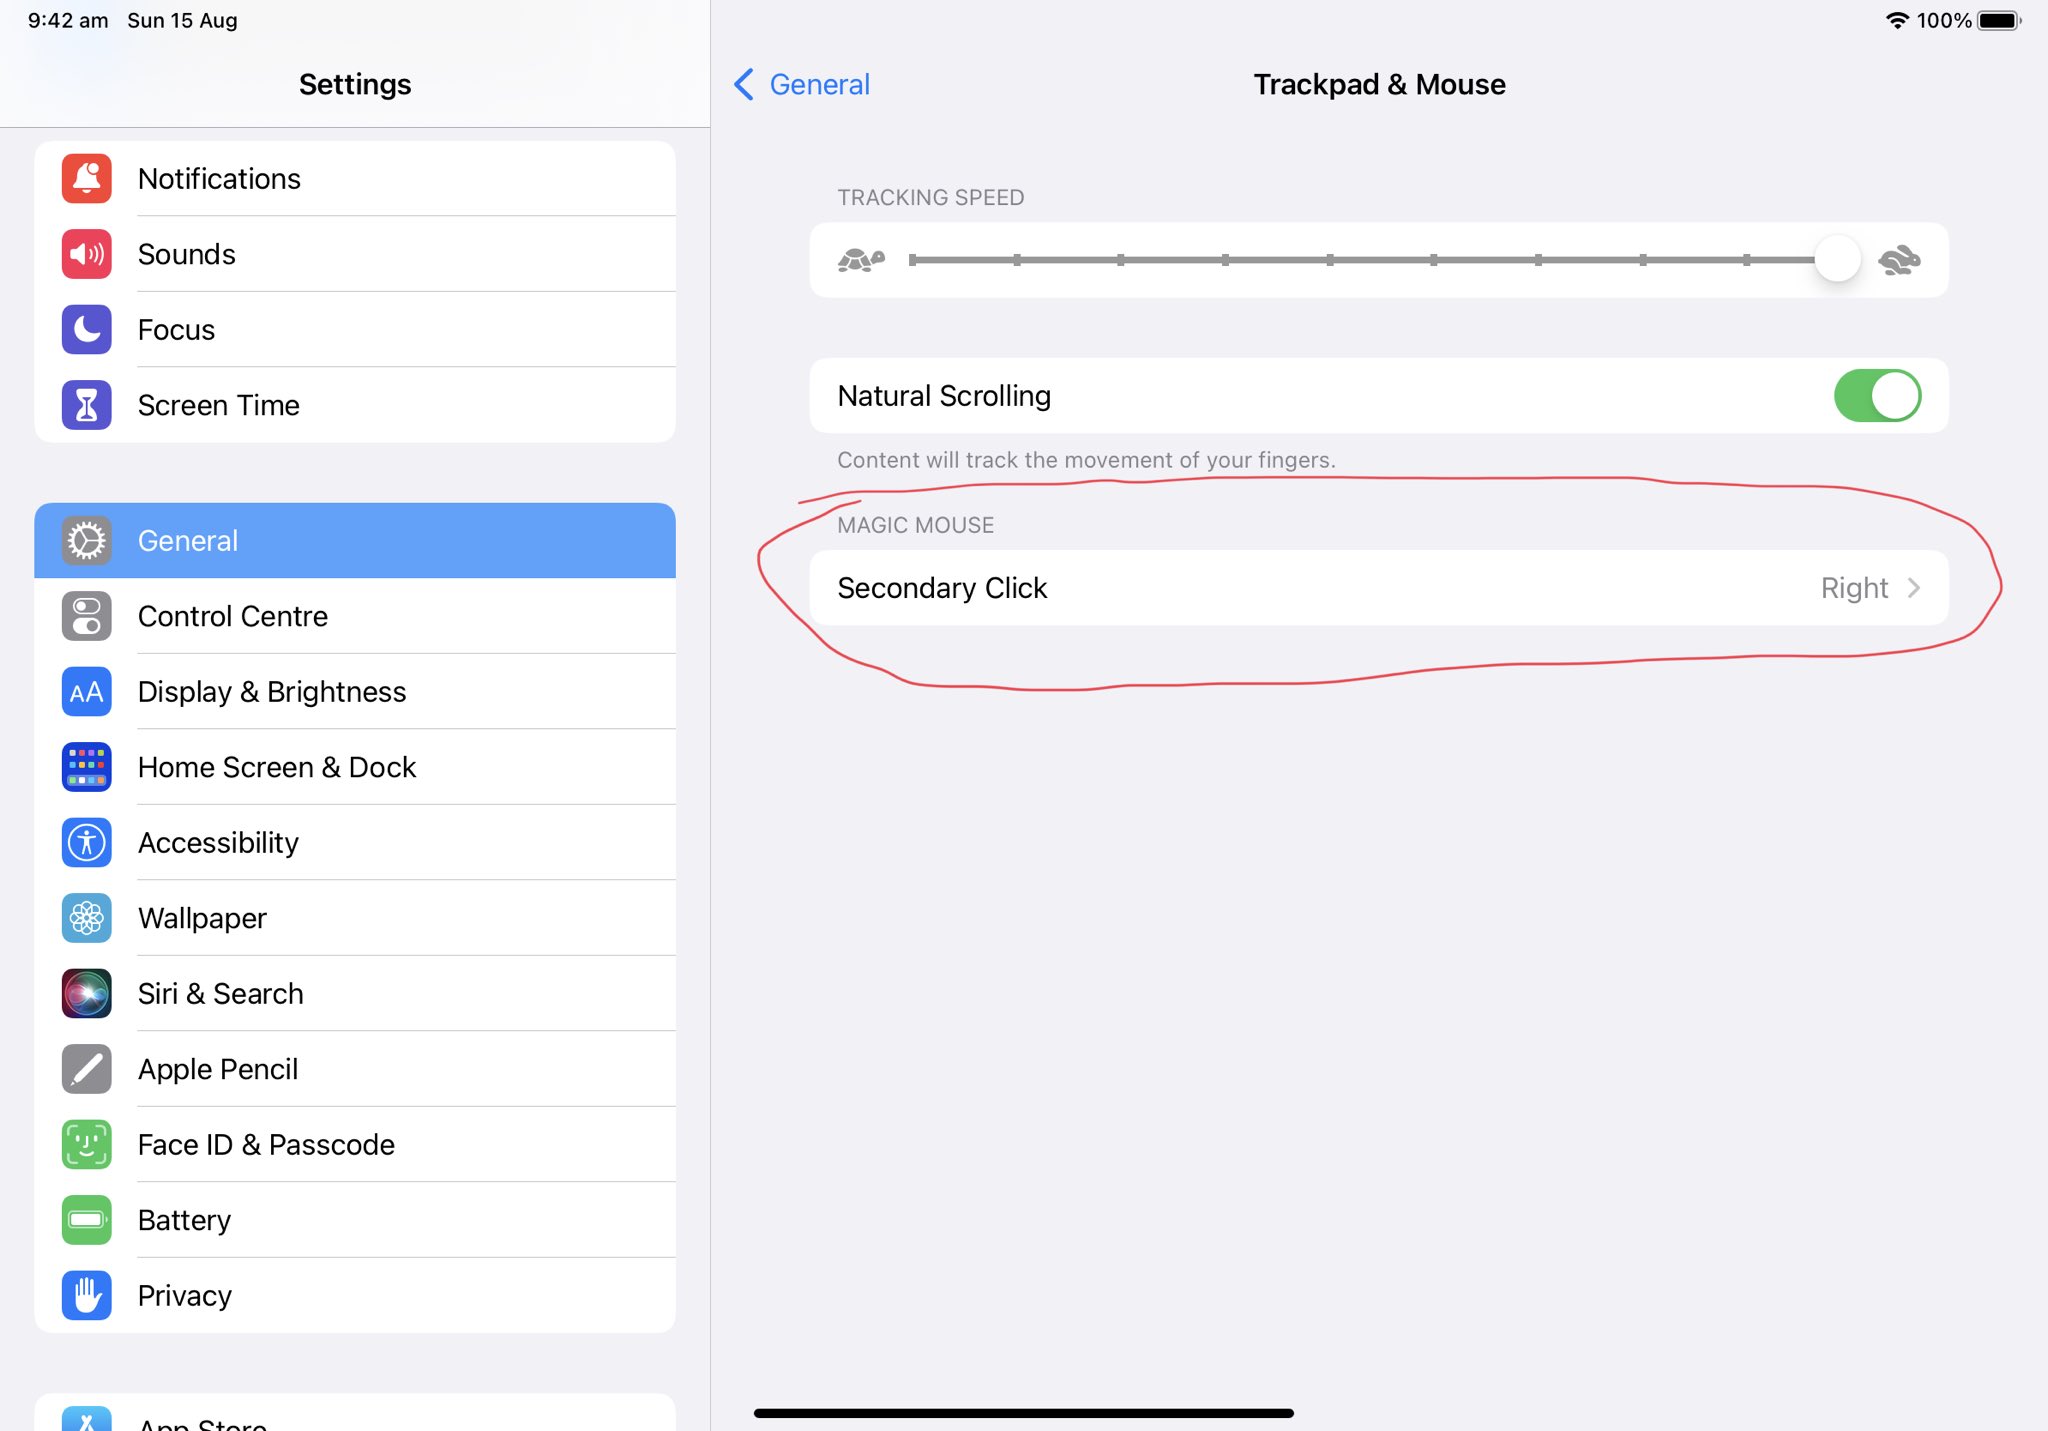 IPadOS Settings screen for mouse and trackpad